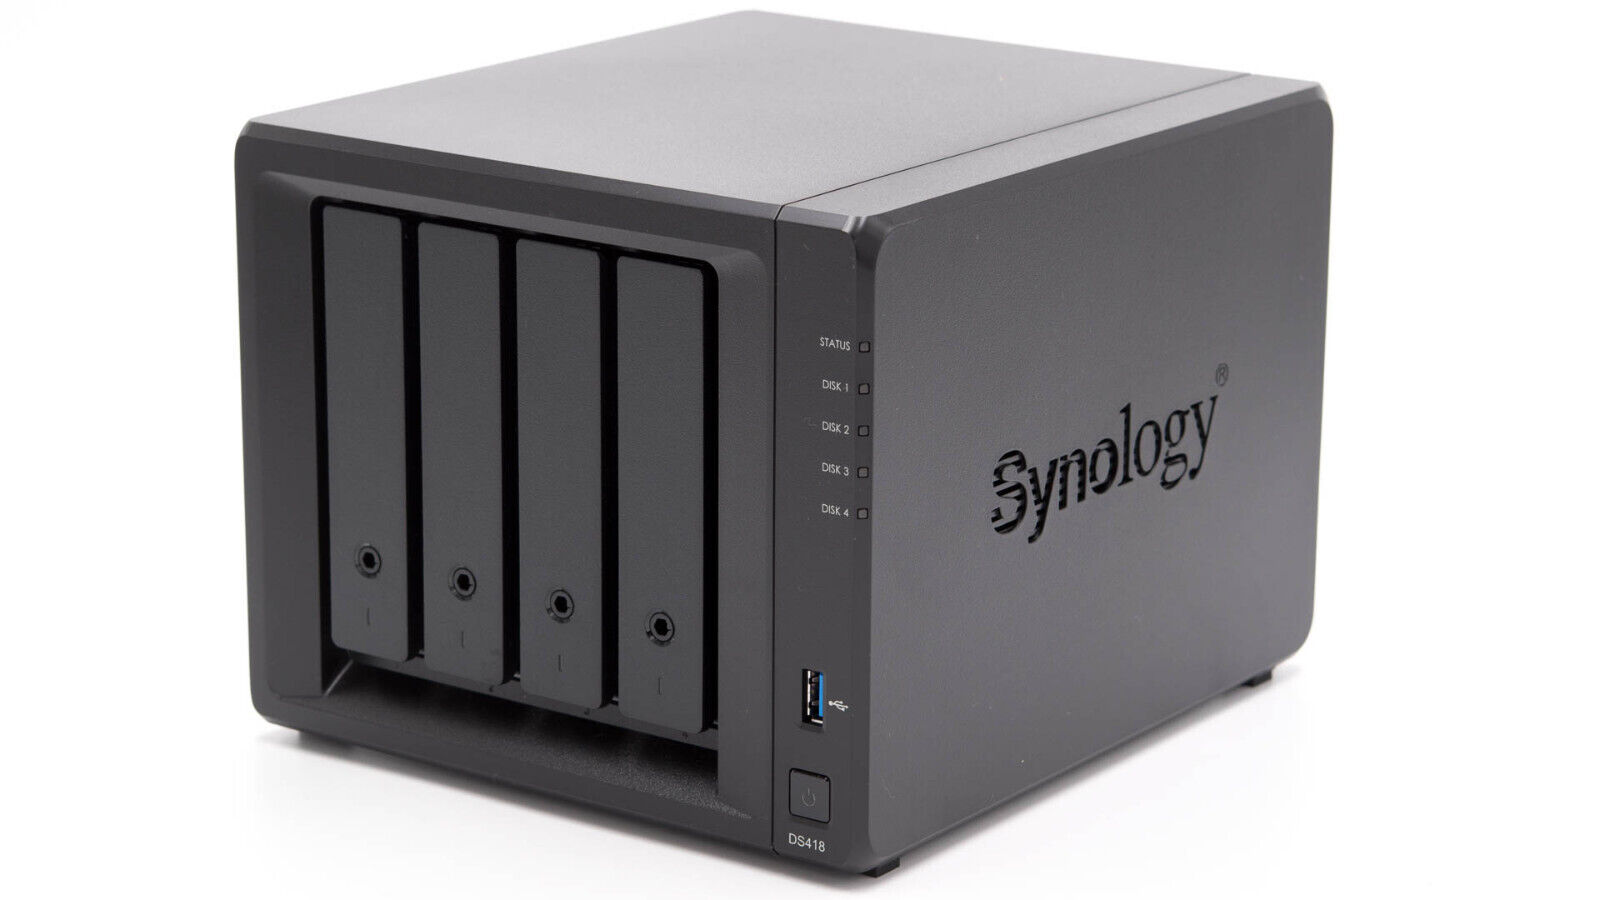 Synology DiskStation DS418 4-bay, includes 2 WD 4TB disks